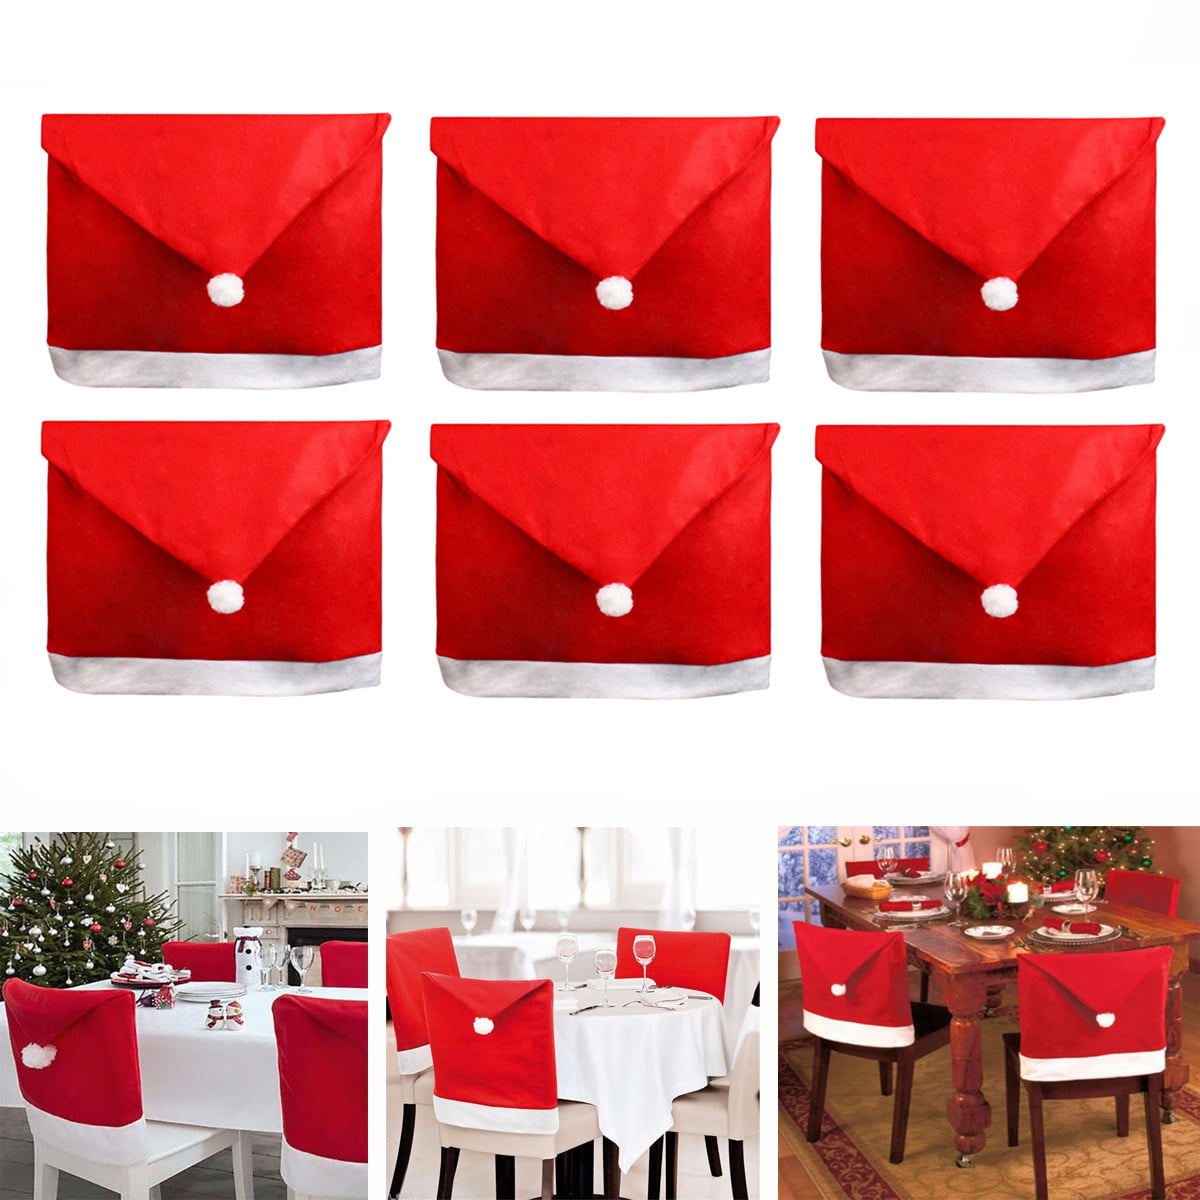 6PCS Chair Cover Christmas Dining Room Decor Santa Hat Slipcovers Decoration US 